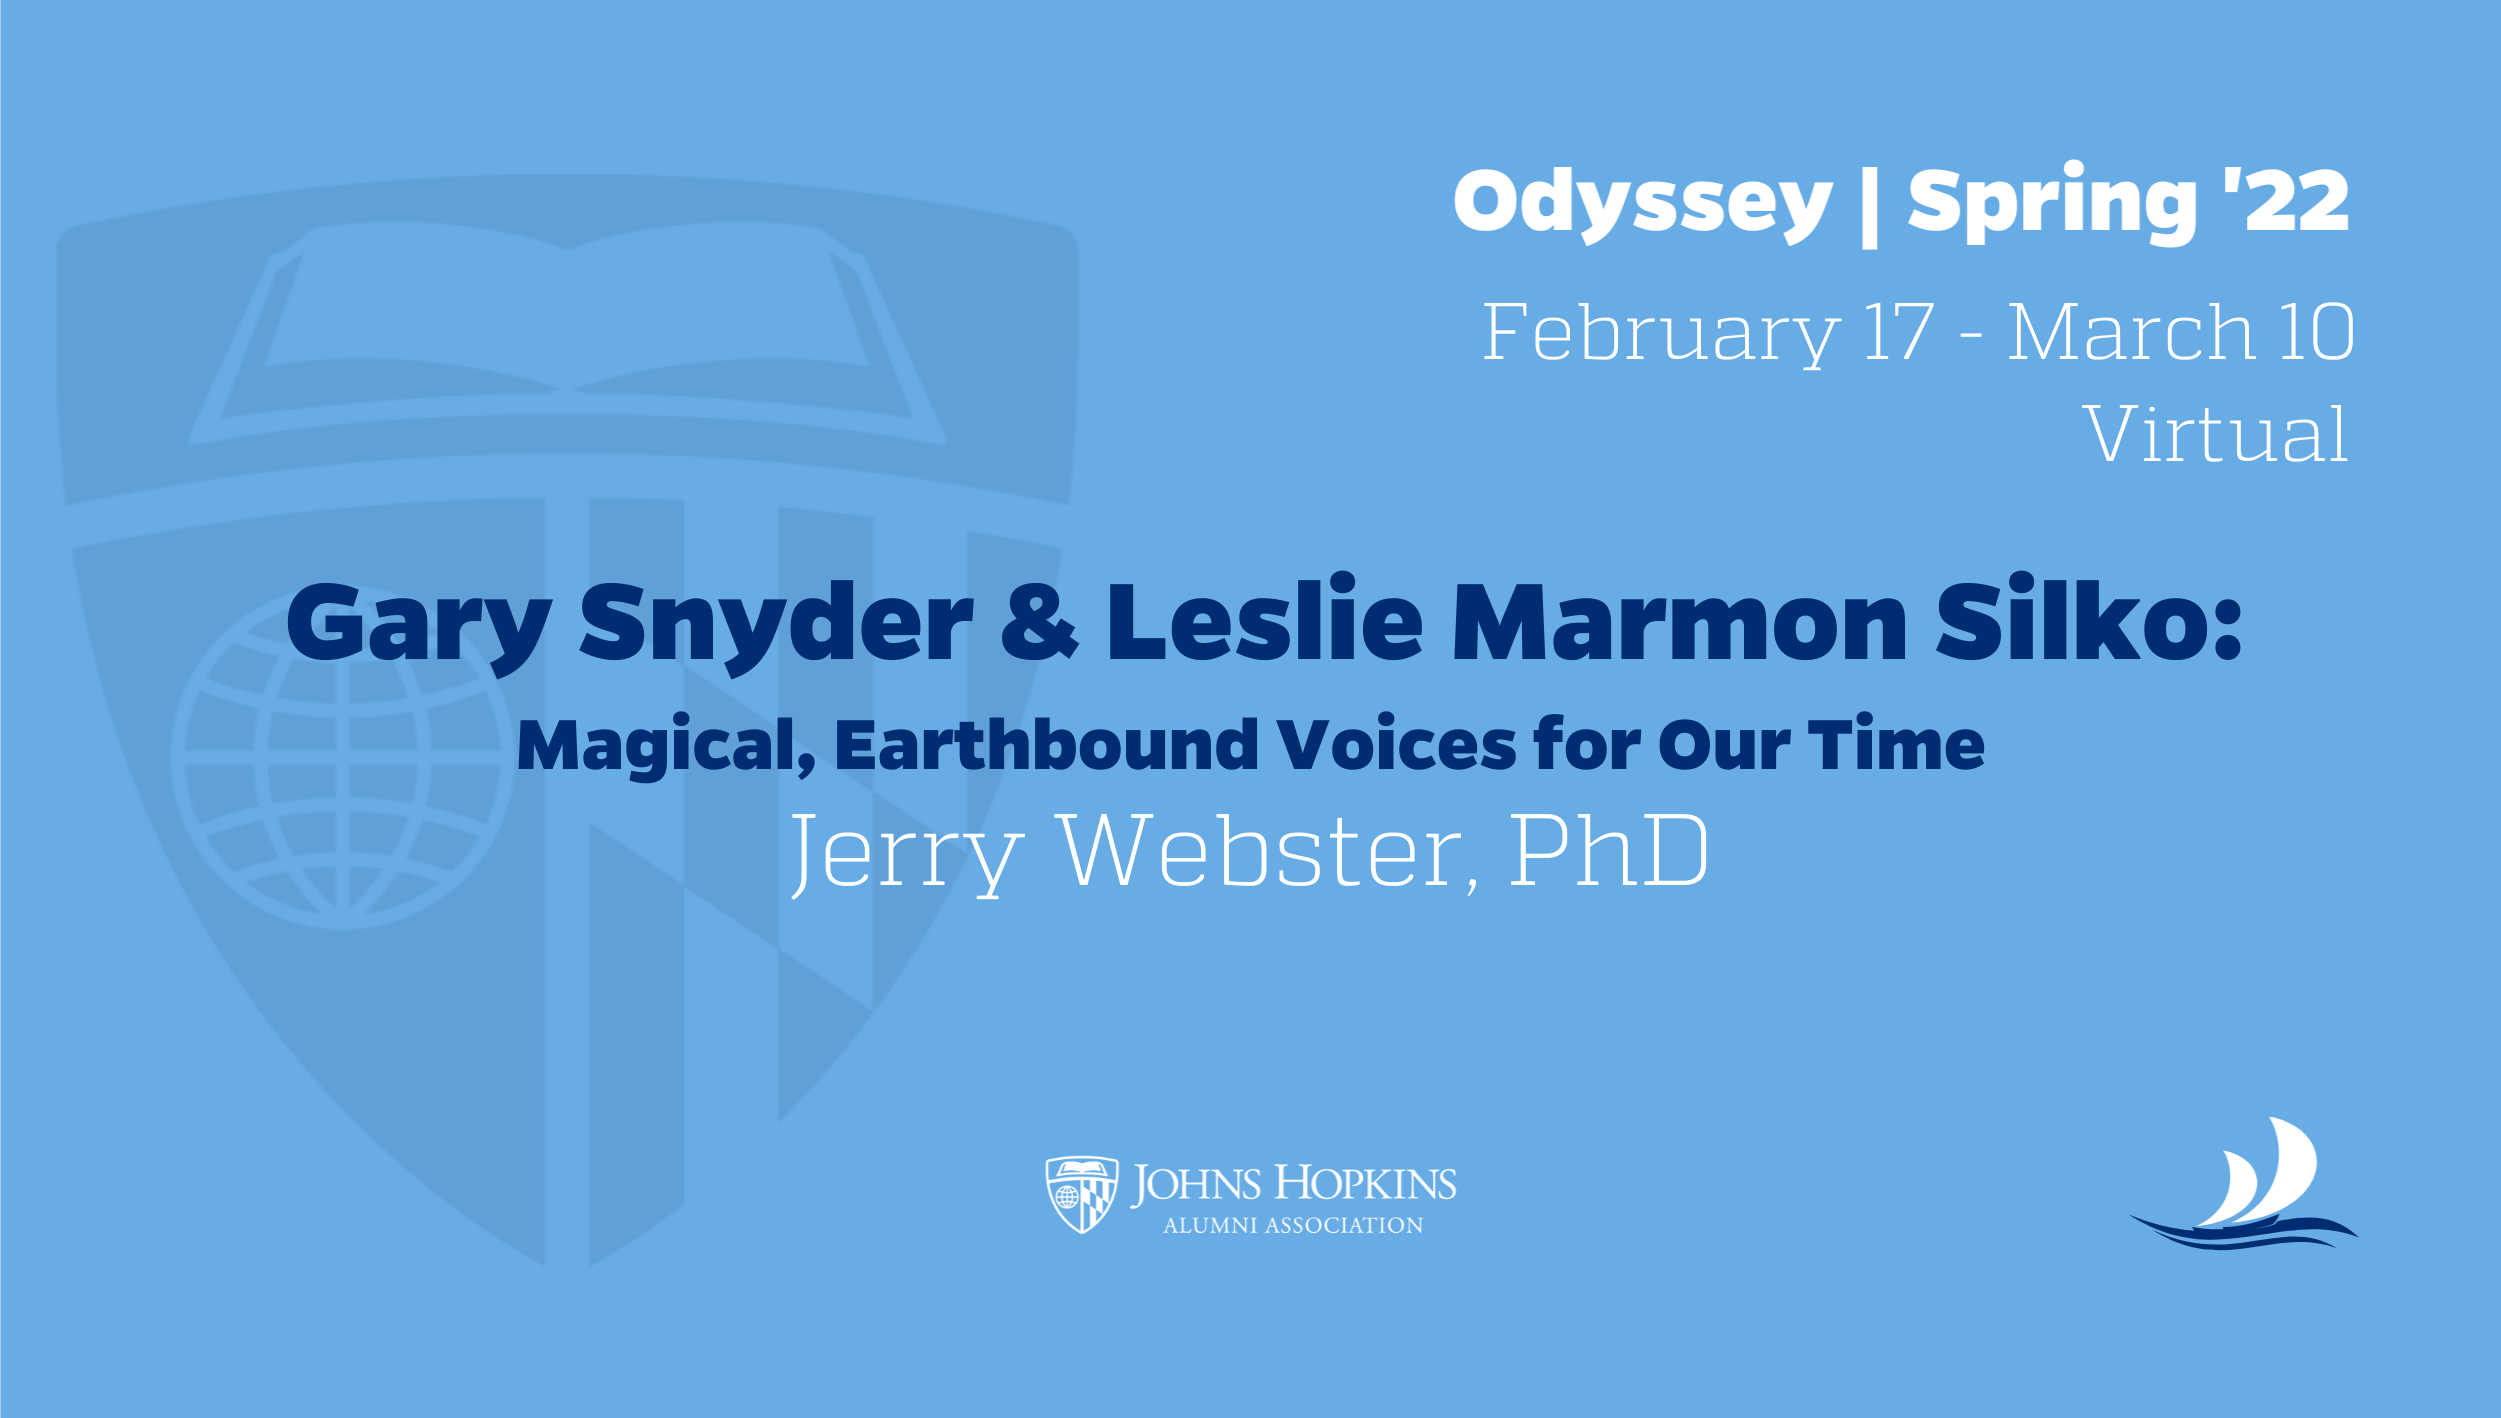 Gary Snyder and Leslie Marmon Silko: Magical, Earthbound Voices for Our Time